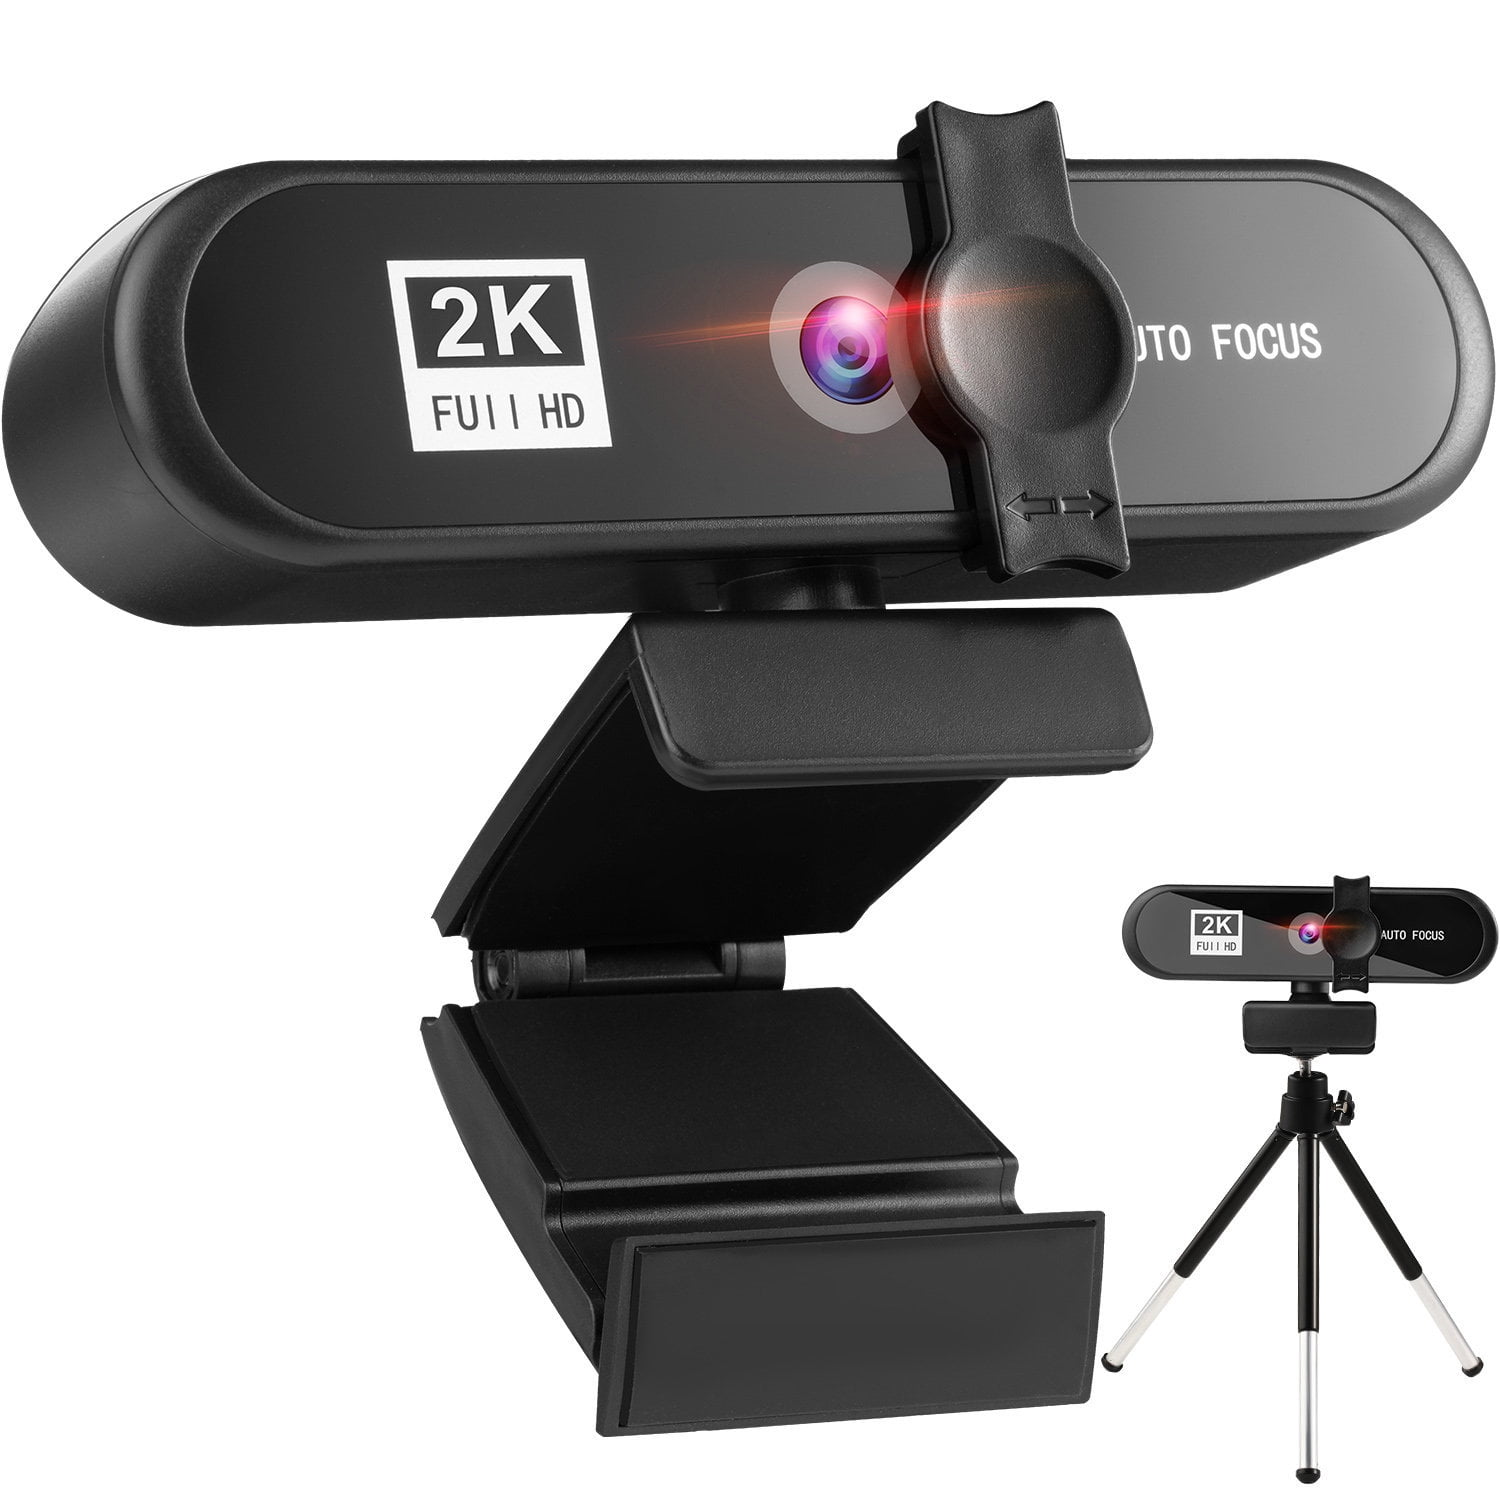 Ultra HD 2k Webcam With Microphone AF 120 Degree Super Wide Angle .